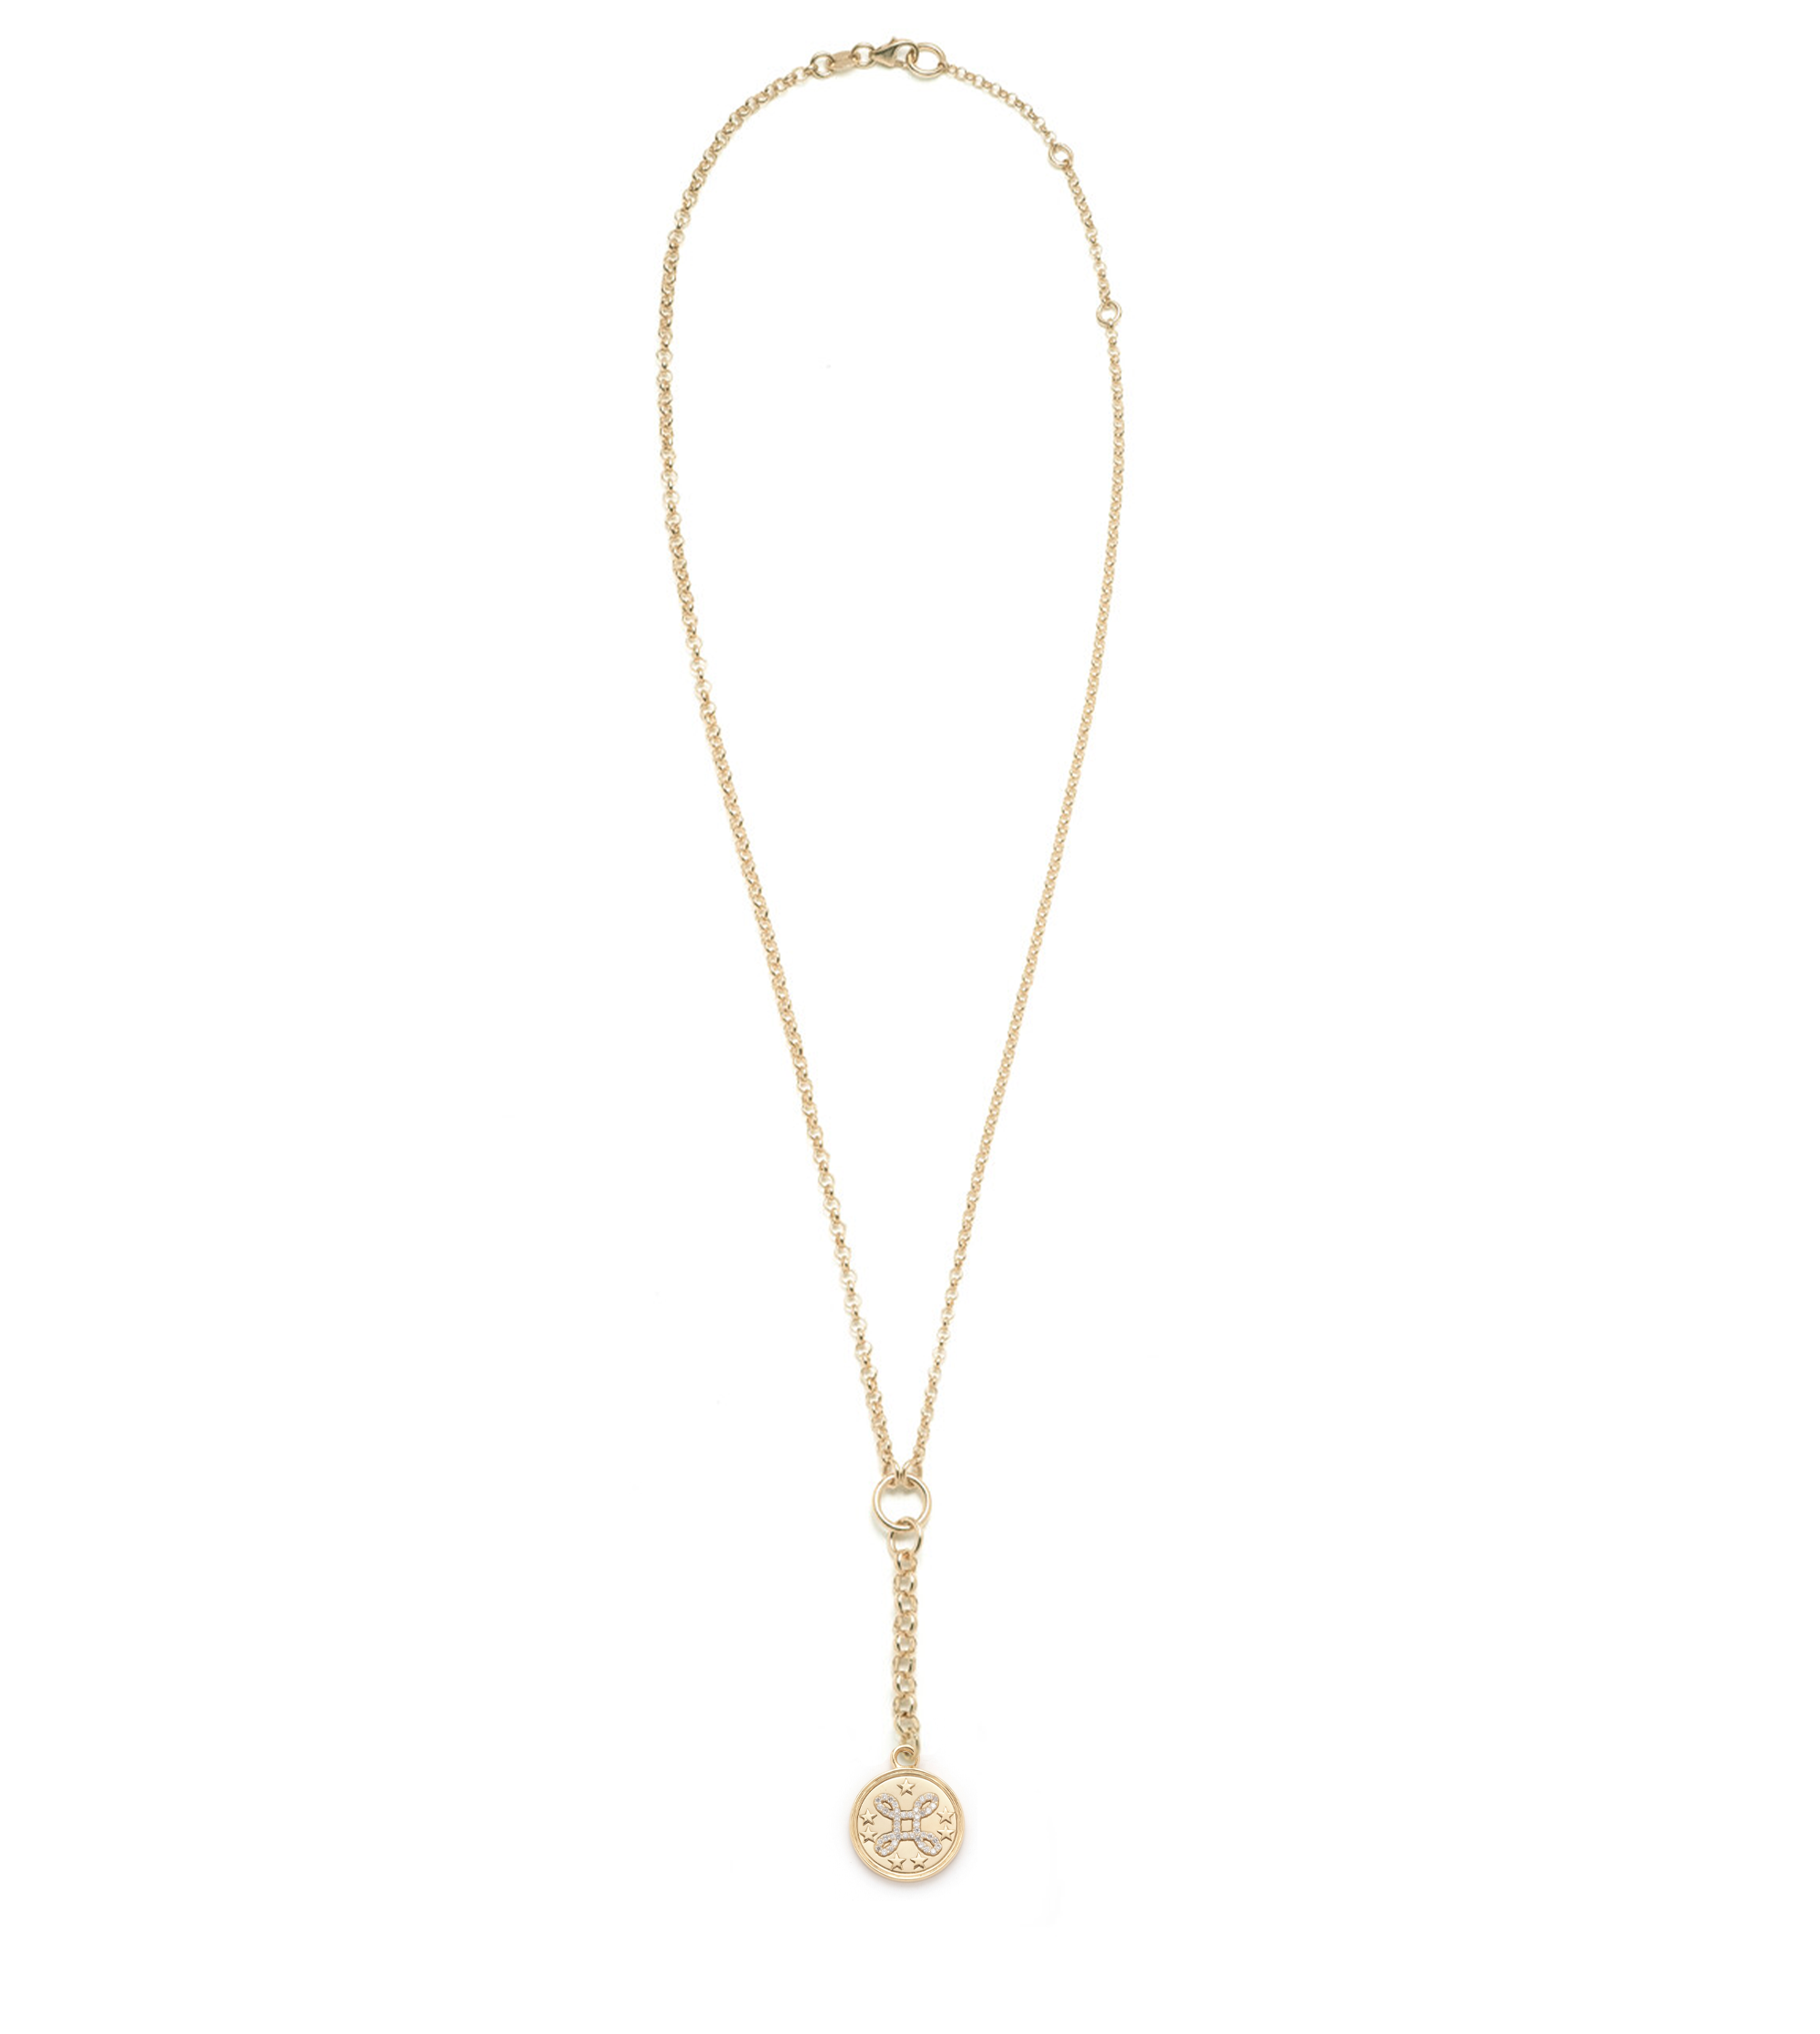 True Love : Small Mixed Belcher Extension Chain Necklace